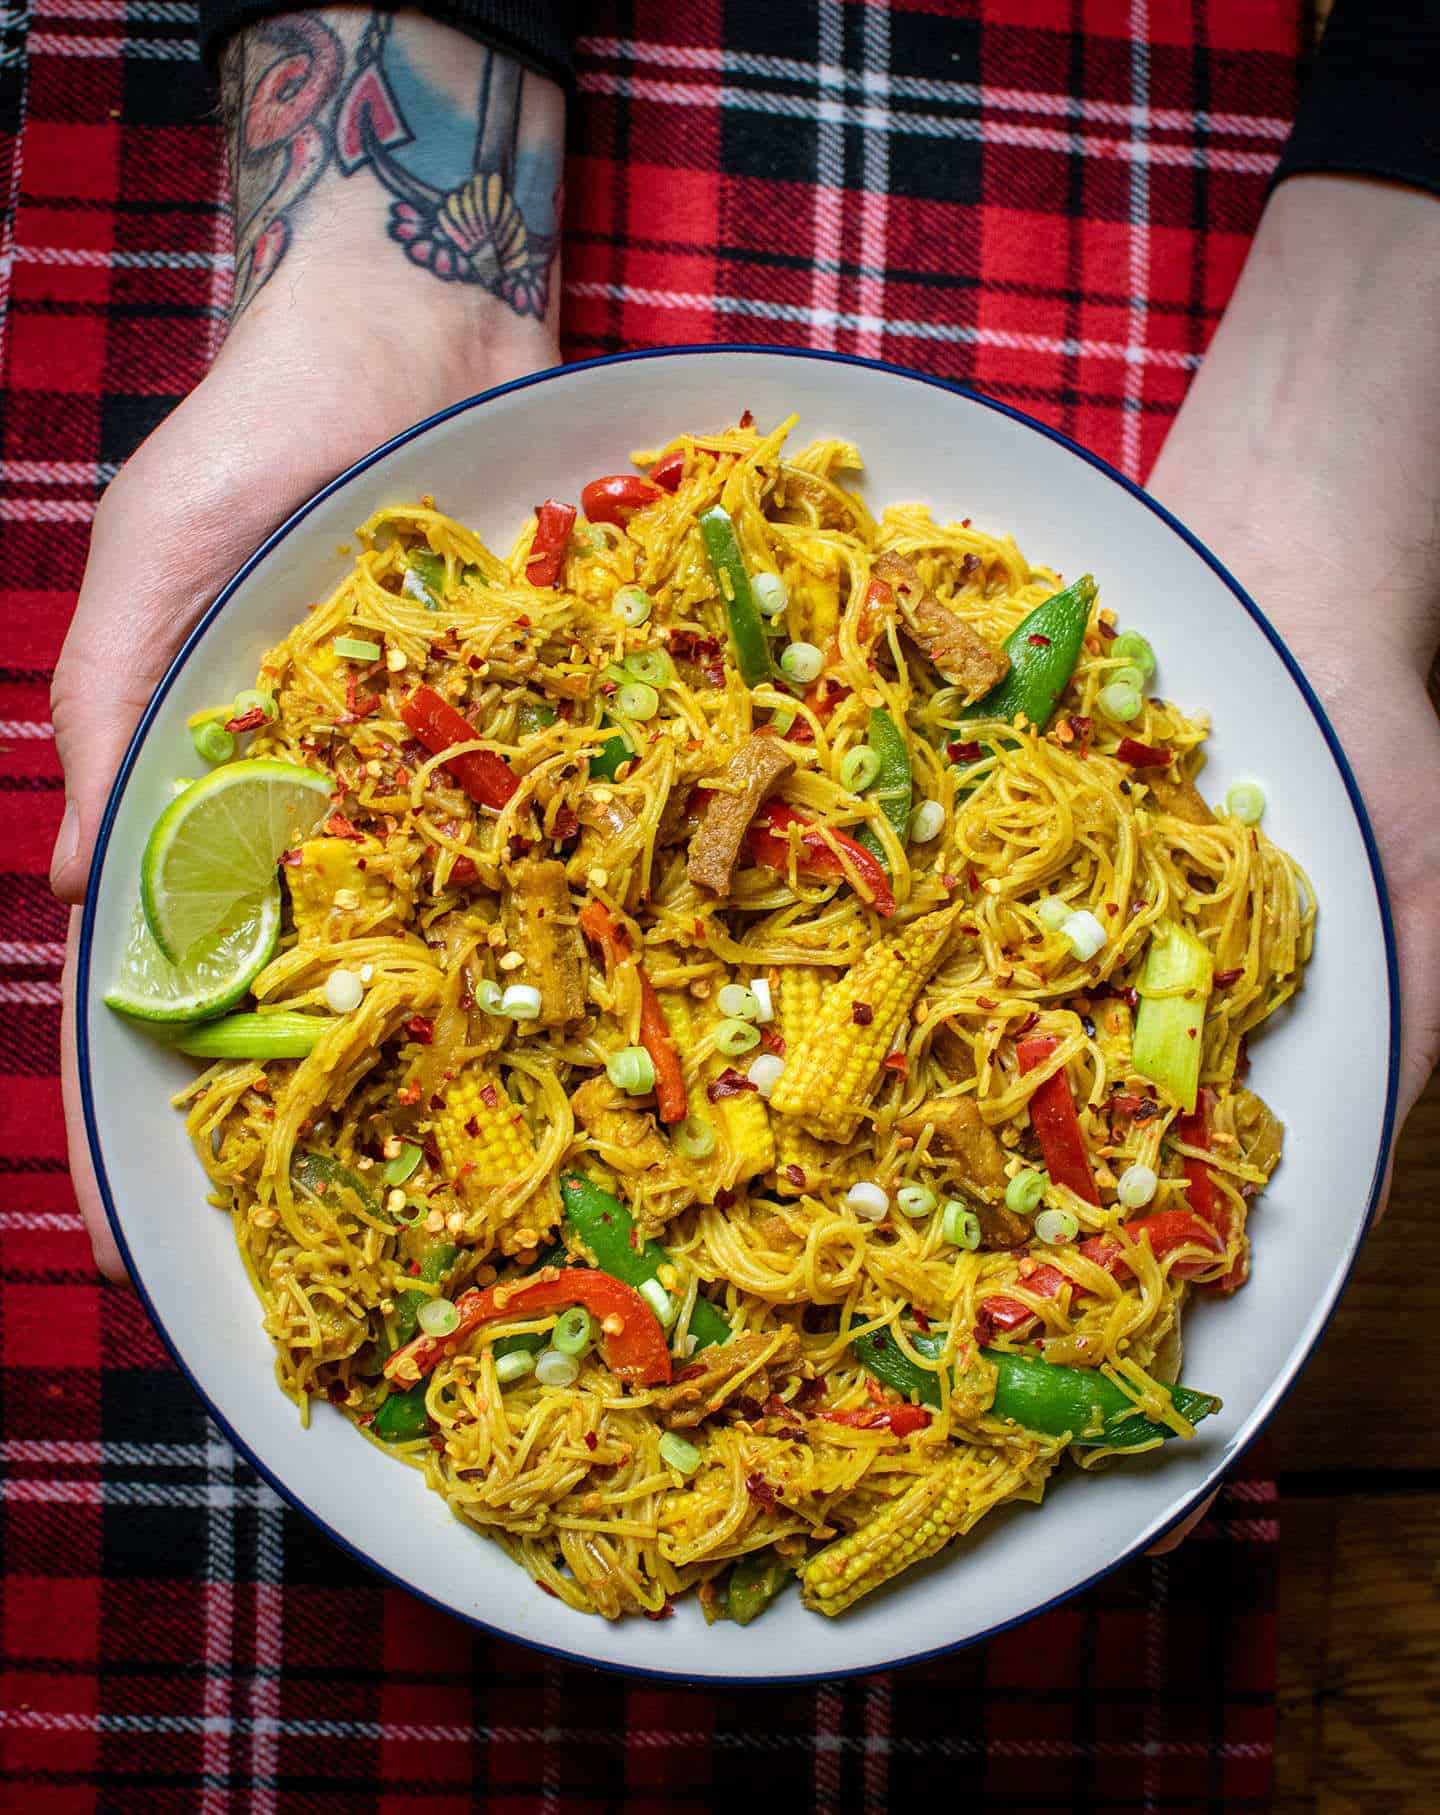 A pair of hands with a tattoo on the left wrist holding a plate of veg Singapore Noodles, with two slices of limes as a garnish on the left of the plate.